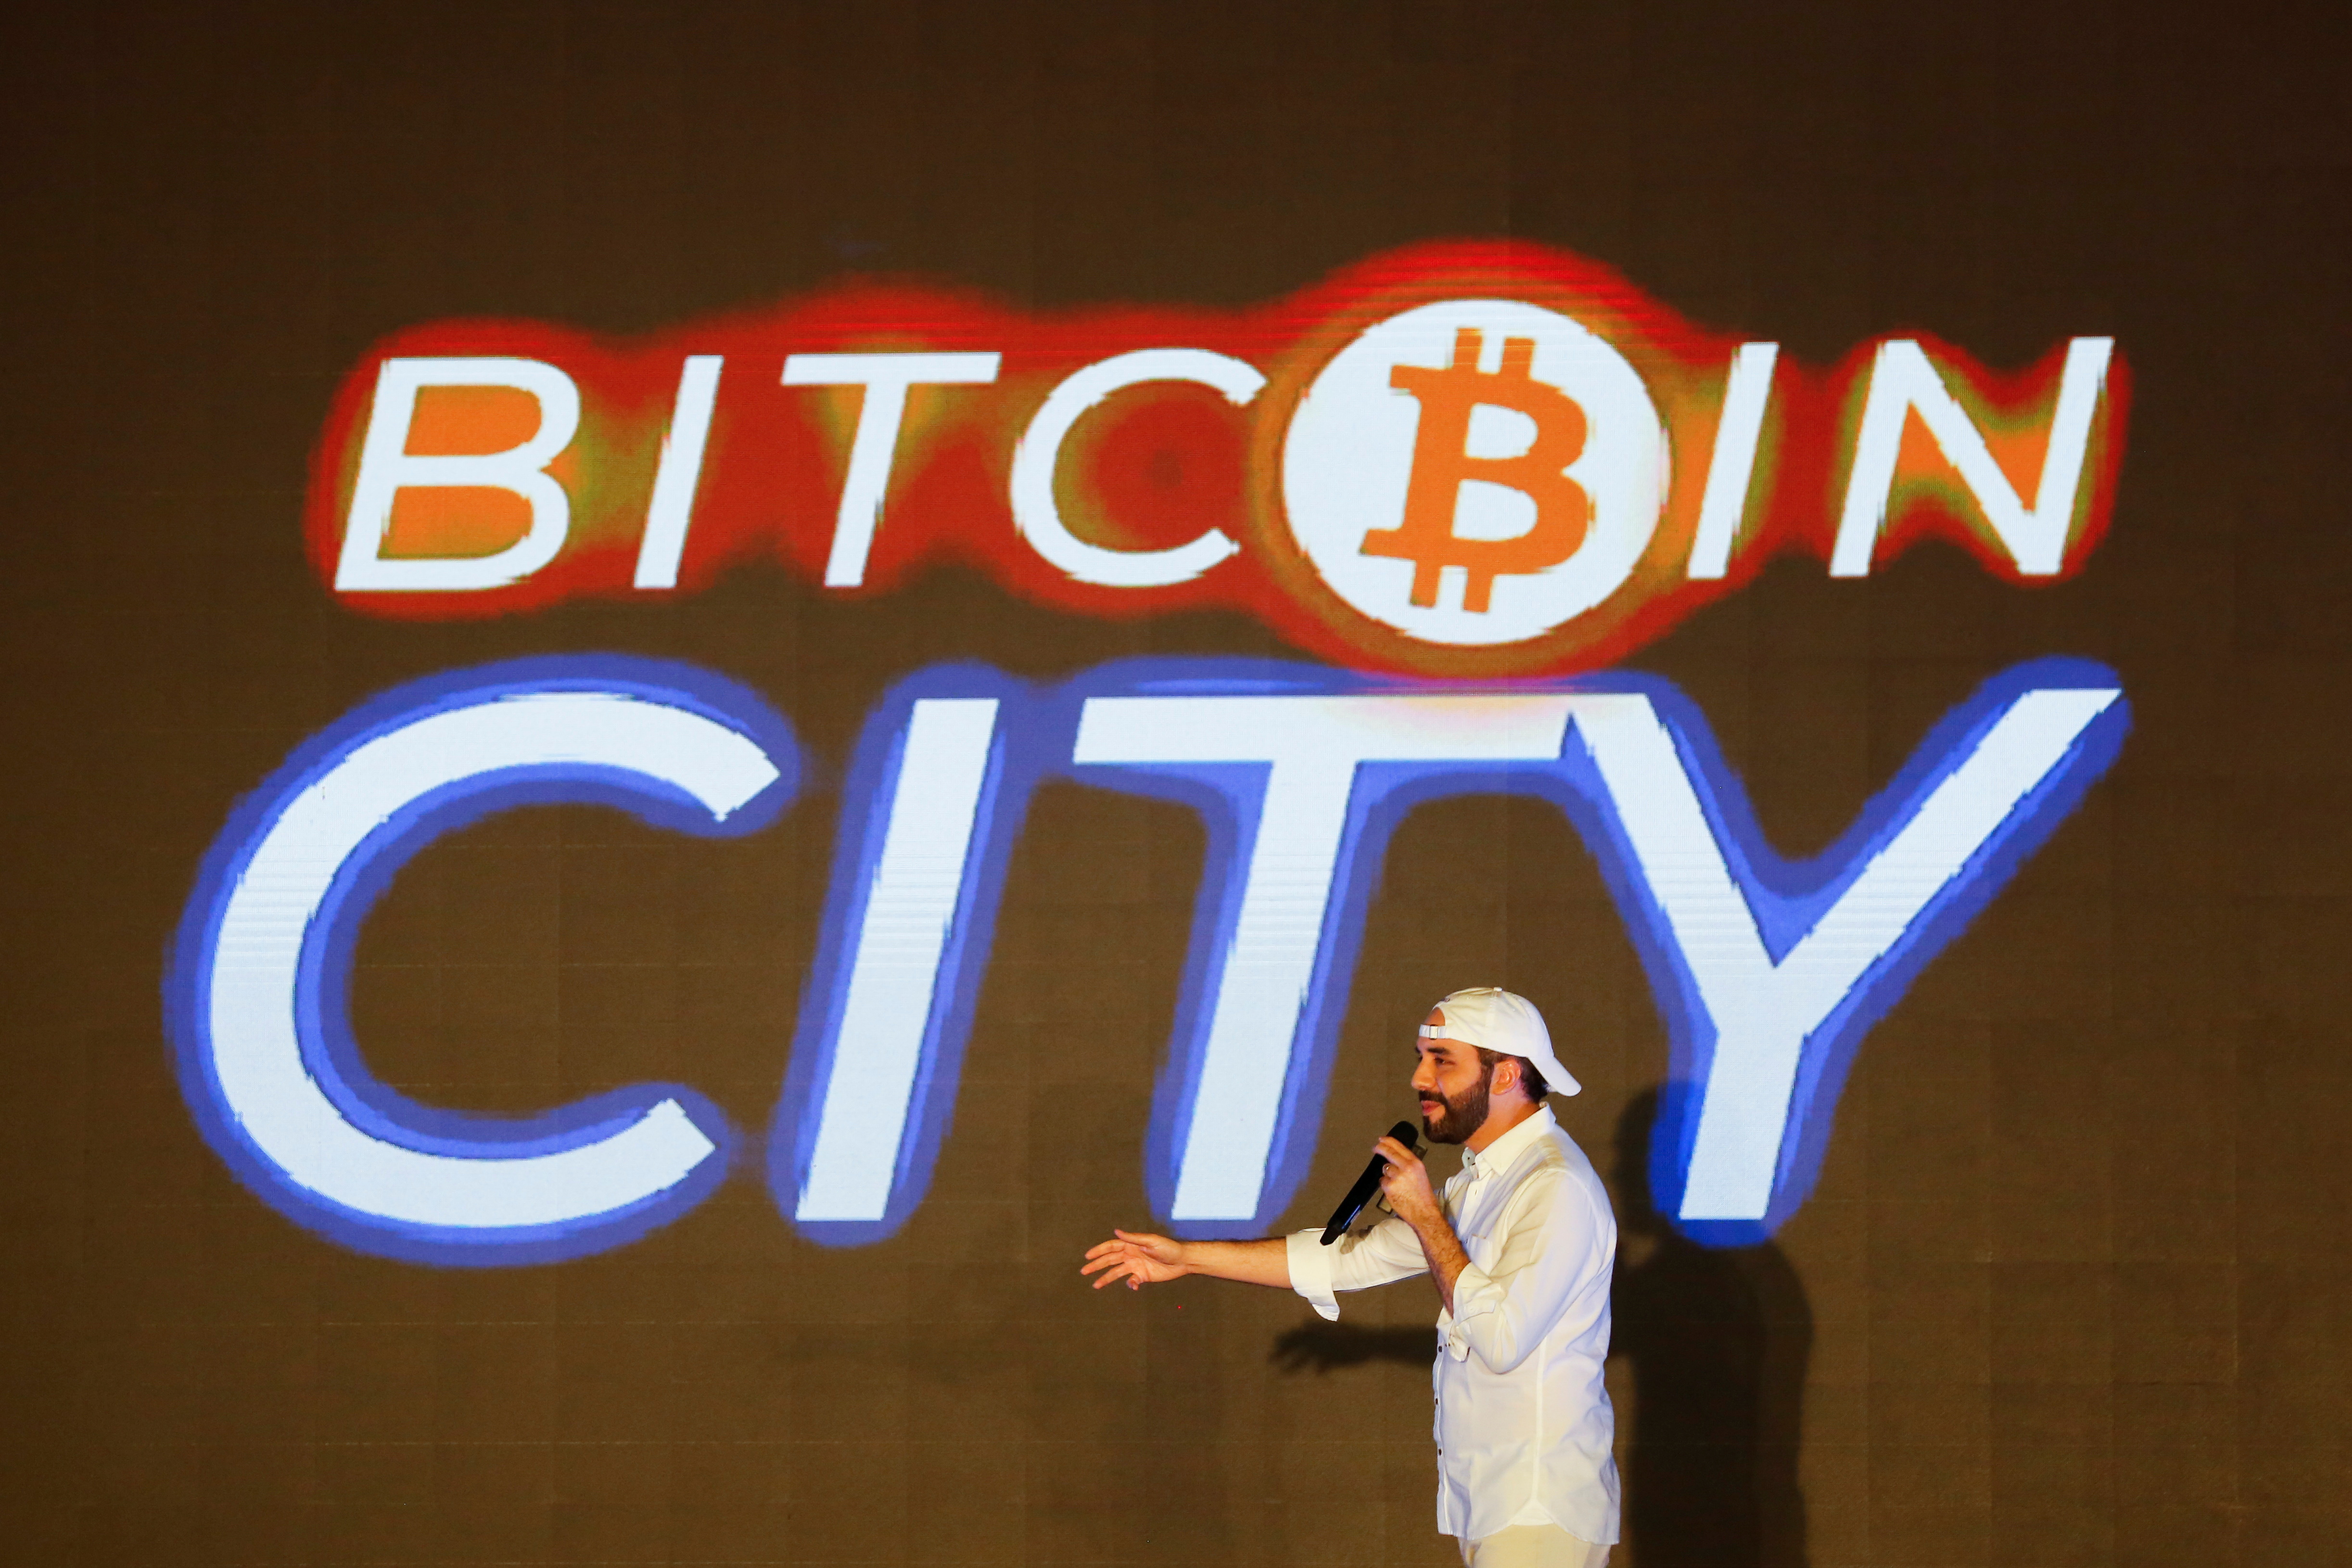 El Salvador’s president Nayib Bukele speaks at the closing party of the “Bitcoin Week” where he announced the plan to build the first “Bitcoin City” in the world, in Teotepeque, El Salvador November 20, 2021. REUTERS/Jose Cabezas